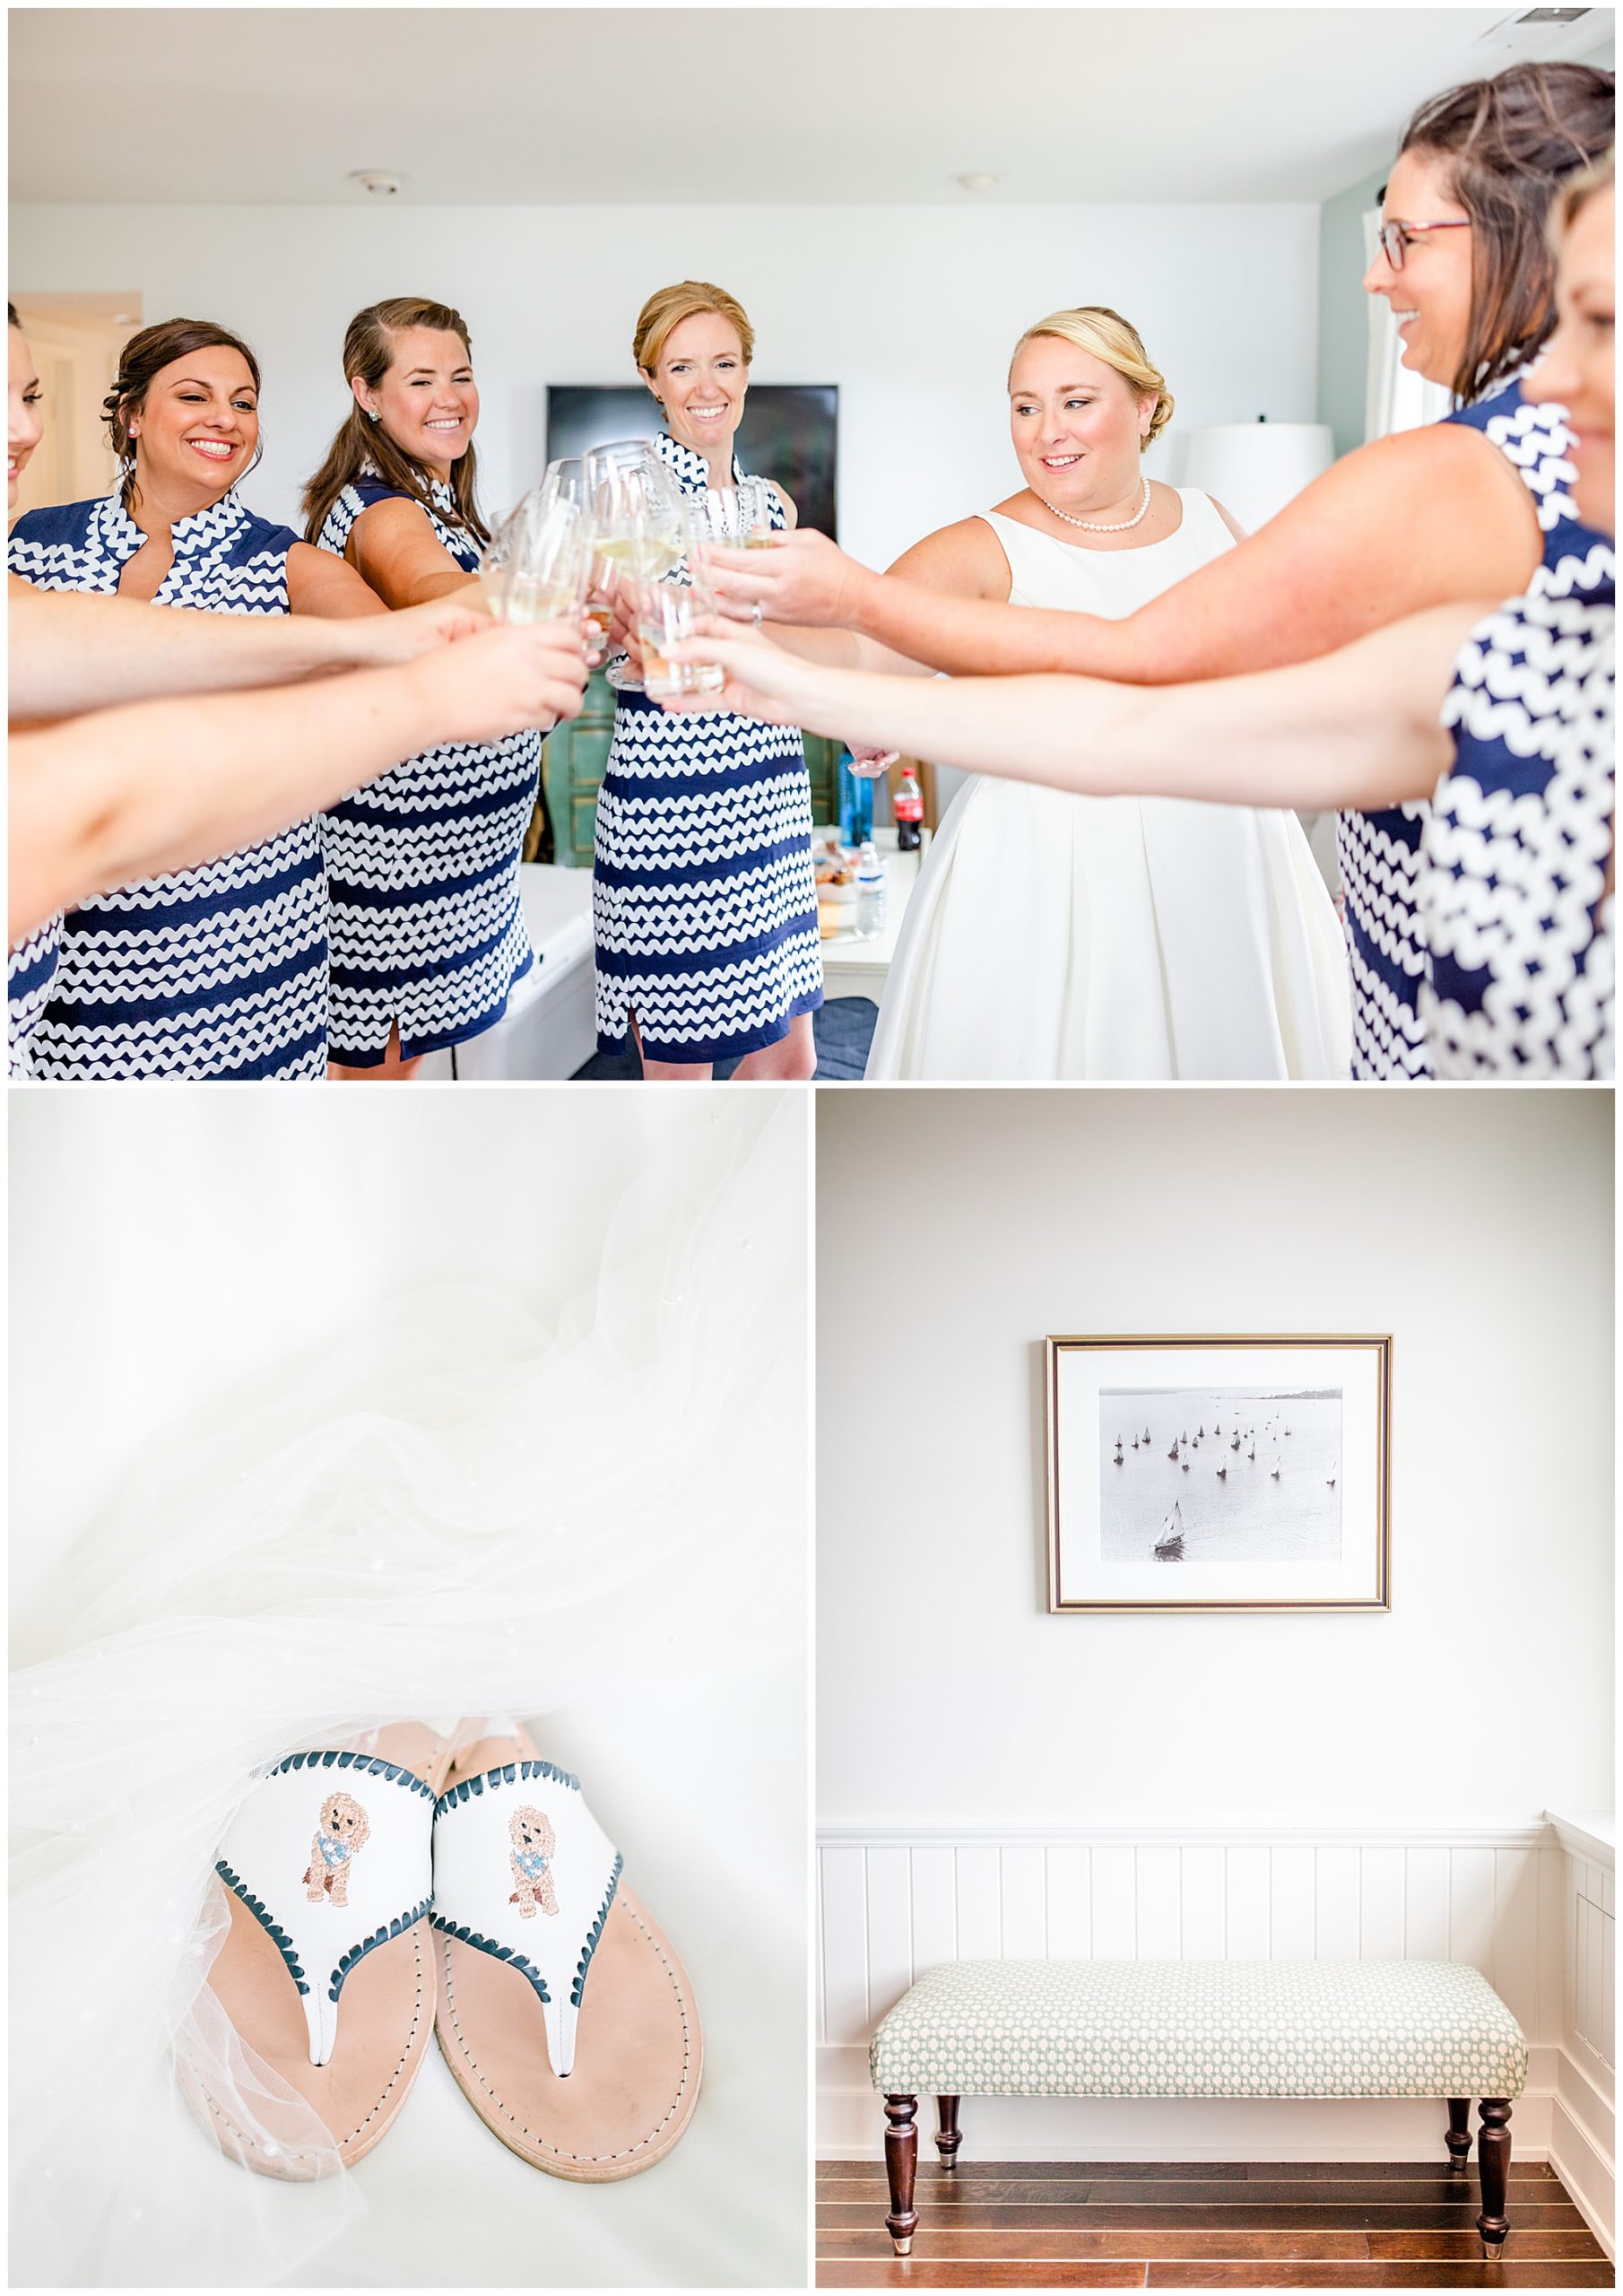 Nantucket inspired Gibson Island Club wedding, nautical wedding inspiration, Annapolitan wedding inspiration, Gibson Island Club wedding photography, Gibson Island Club wedding photographer, Annapolis wedding photographer, Baltimore wedding photographer, Maryland wedding photographer, nautical aesthetic, Annapolis wedding inspiration, Rachel E.H. Photography, bride with bridesmaids, bride clinking glasses with bridesmaids, white sandals, white embroidered dog sandals, sandals with dog